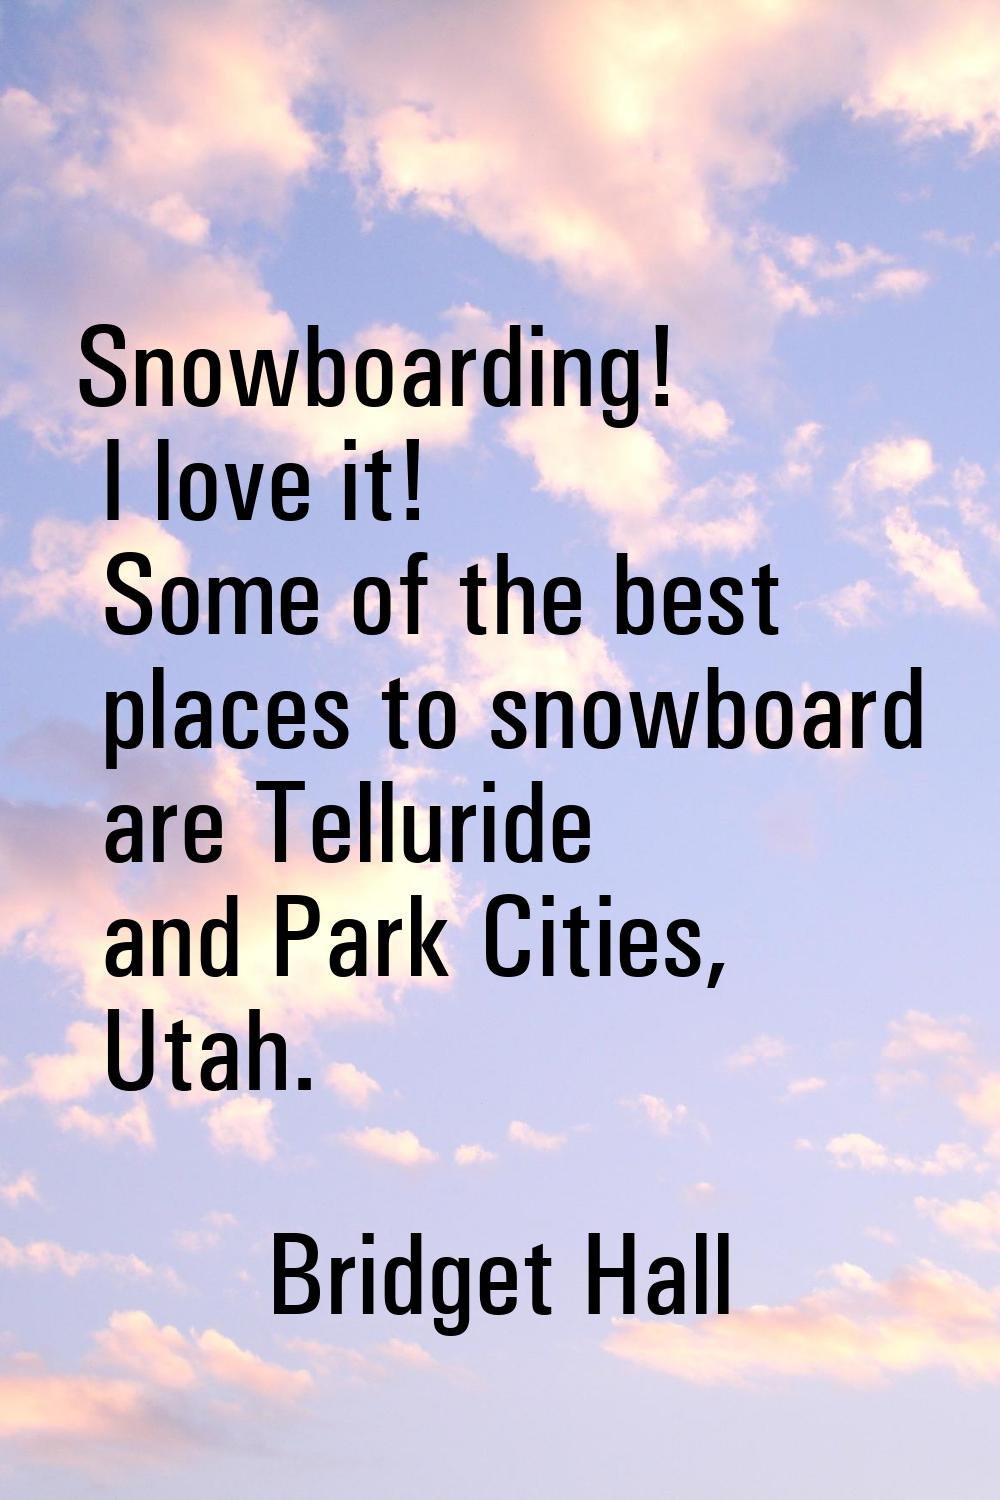 Snowboarding! I love it! Some of the best places to snowboard are Telluride and Park Cities, Utah.